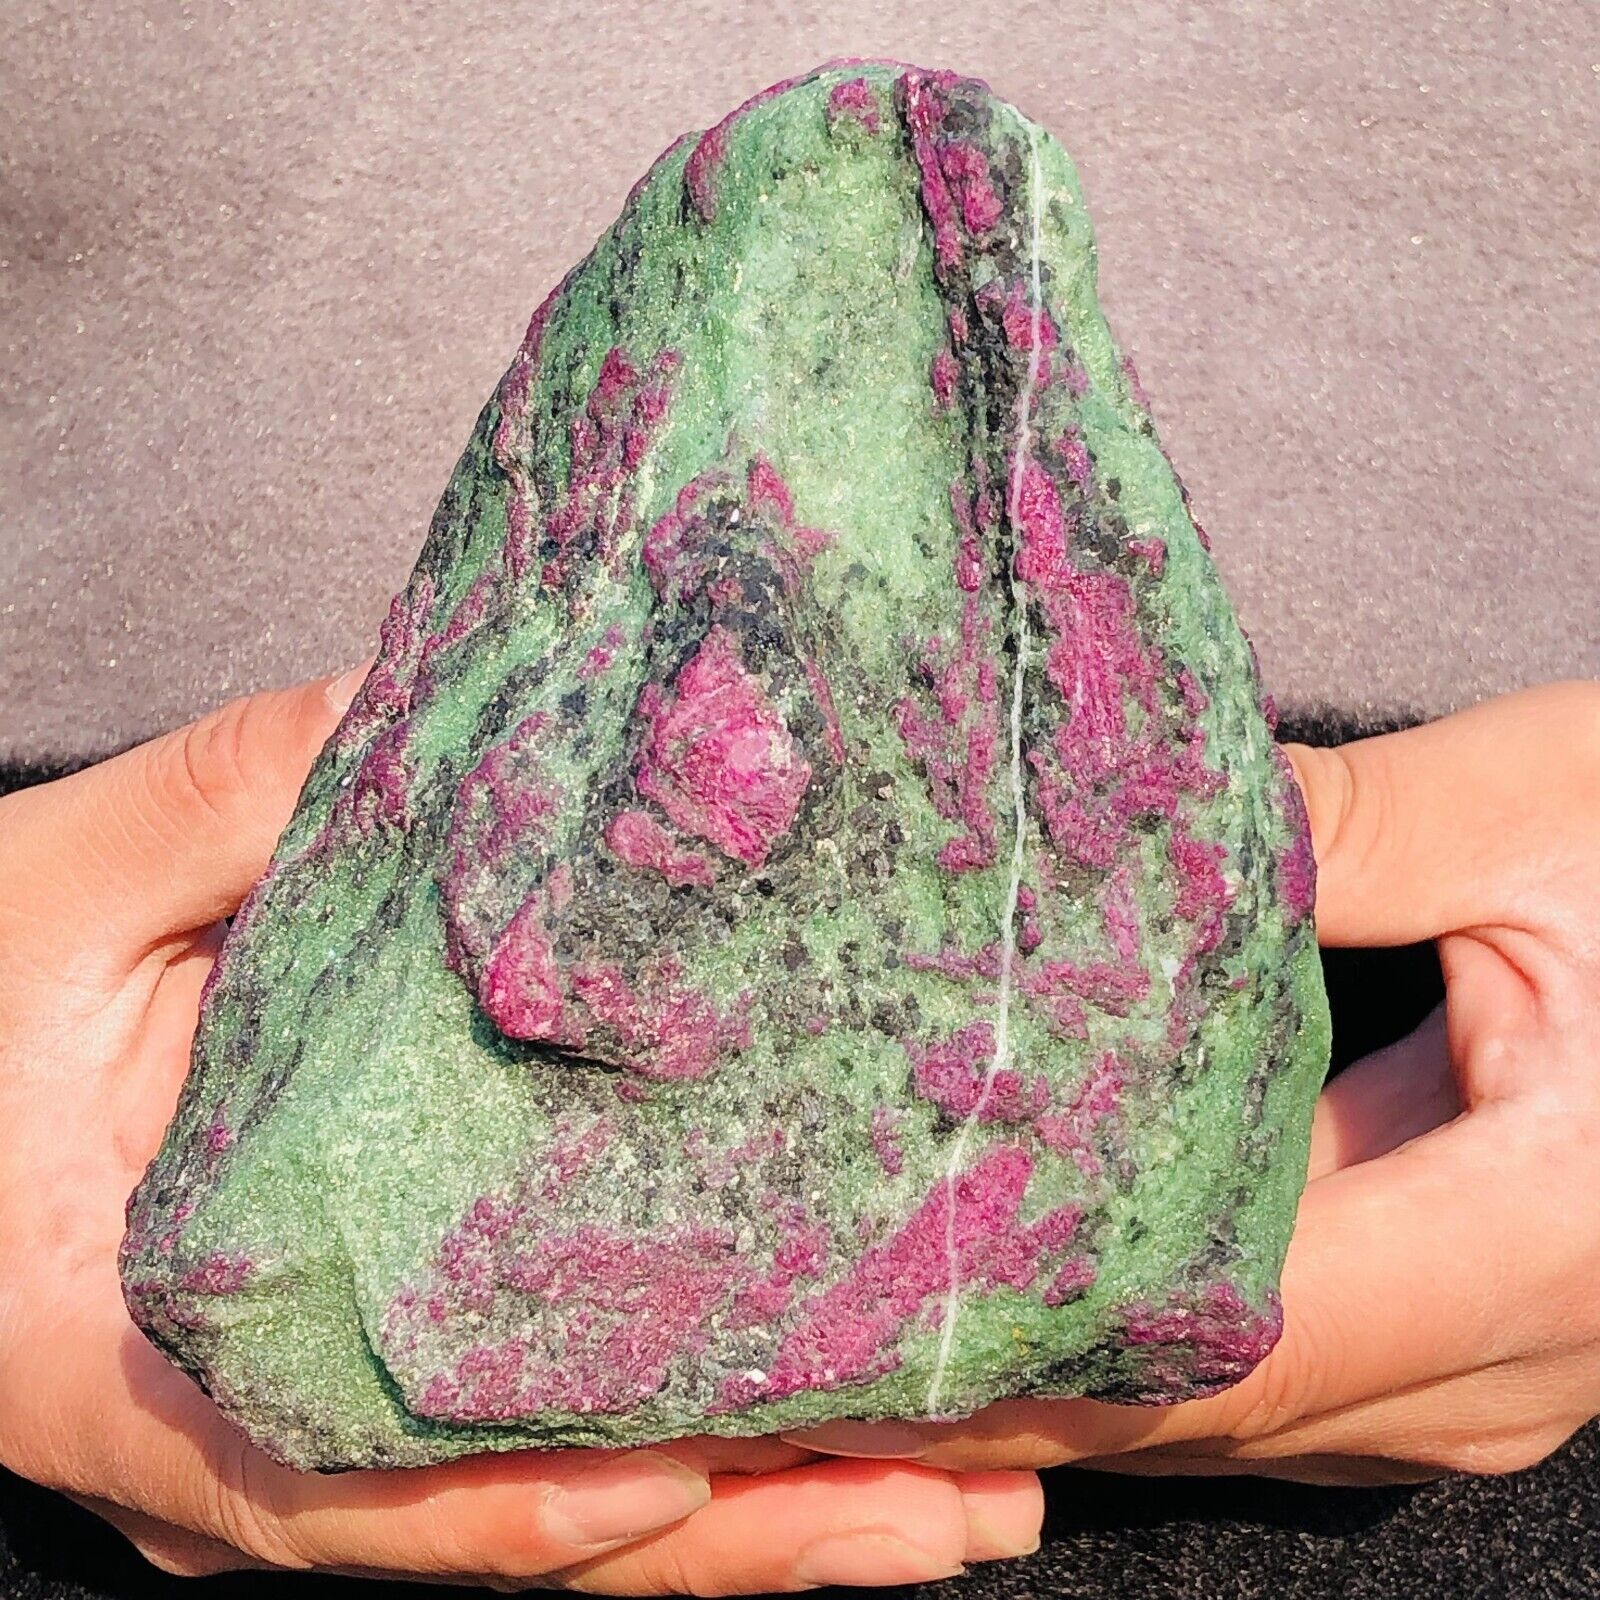 6.95lb Large Rare Natural Red Green Gemstone Ruby Zoisite Crystal Rough Mineral